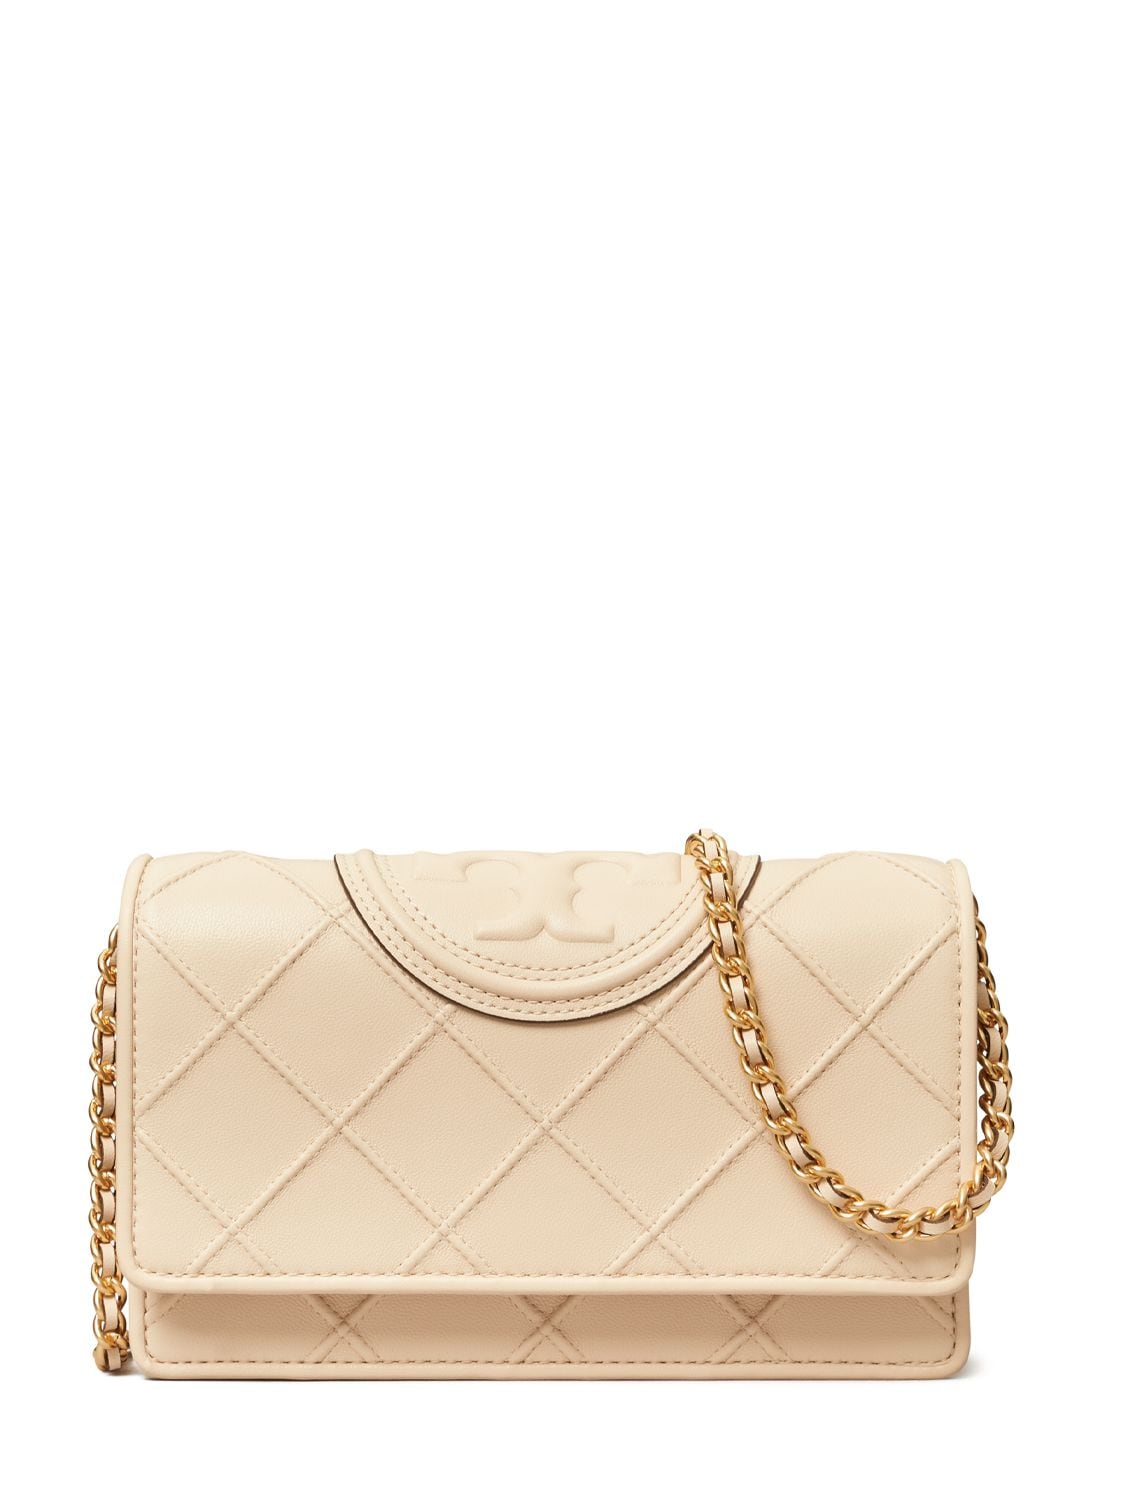 Tory Burch Fleming Soft Leather Shoulder Bag In New Cream